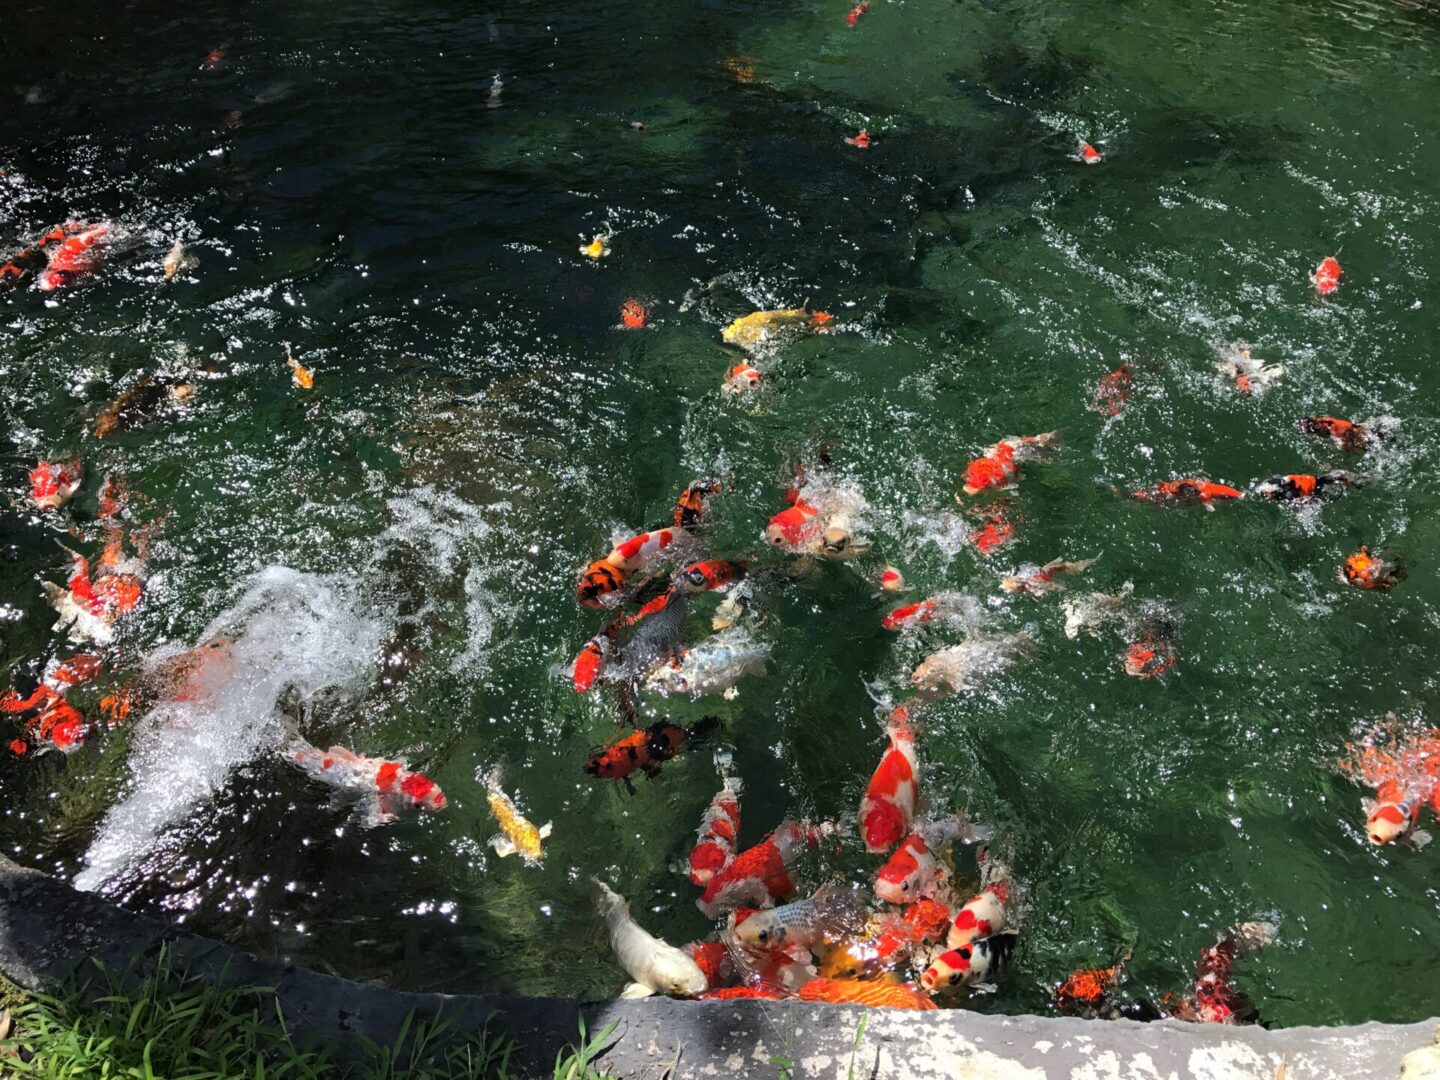 A bunch of pond koi waiting for food